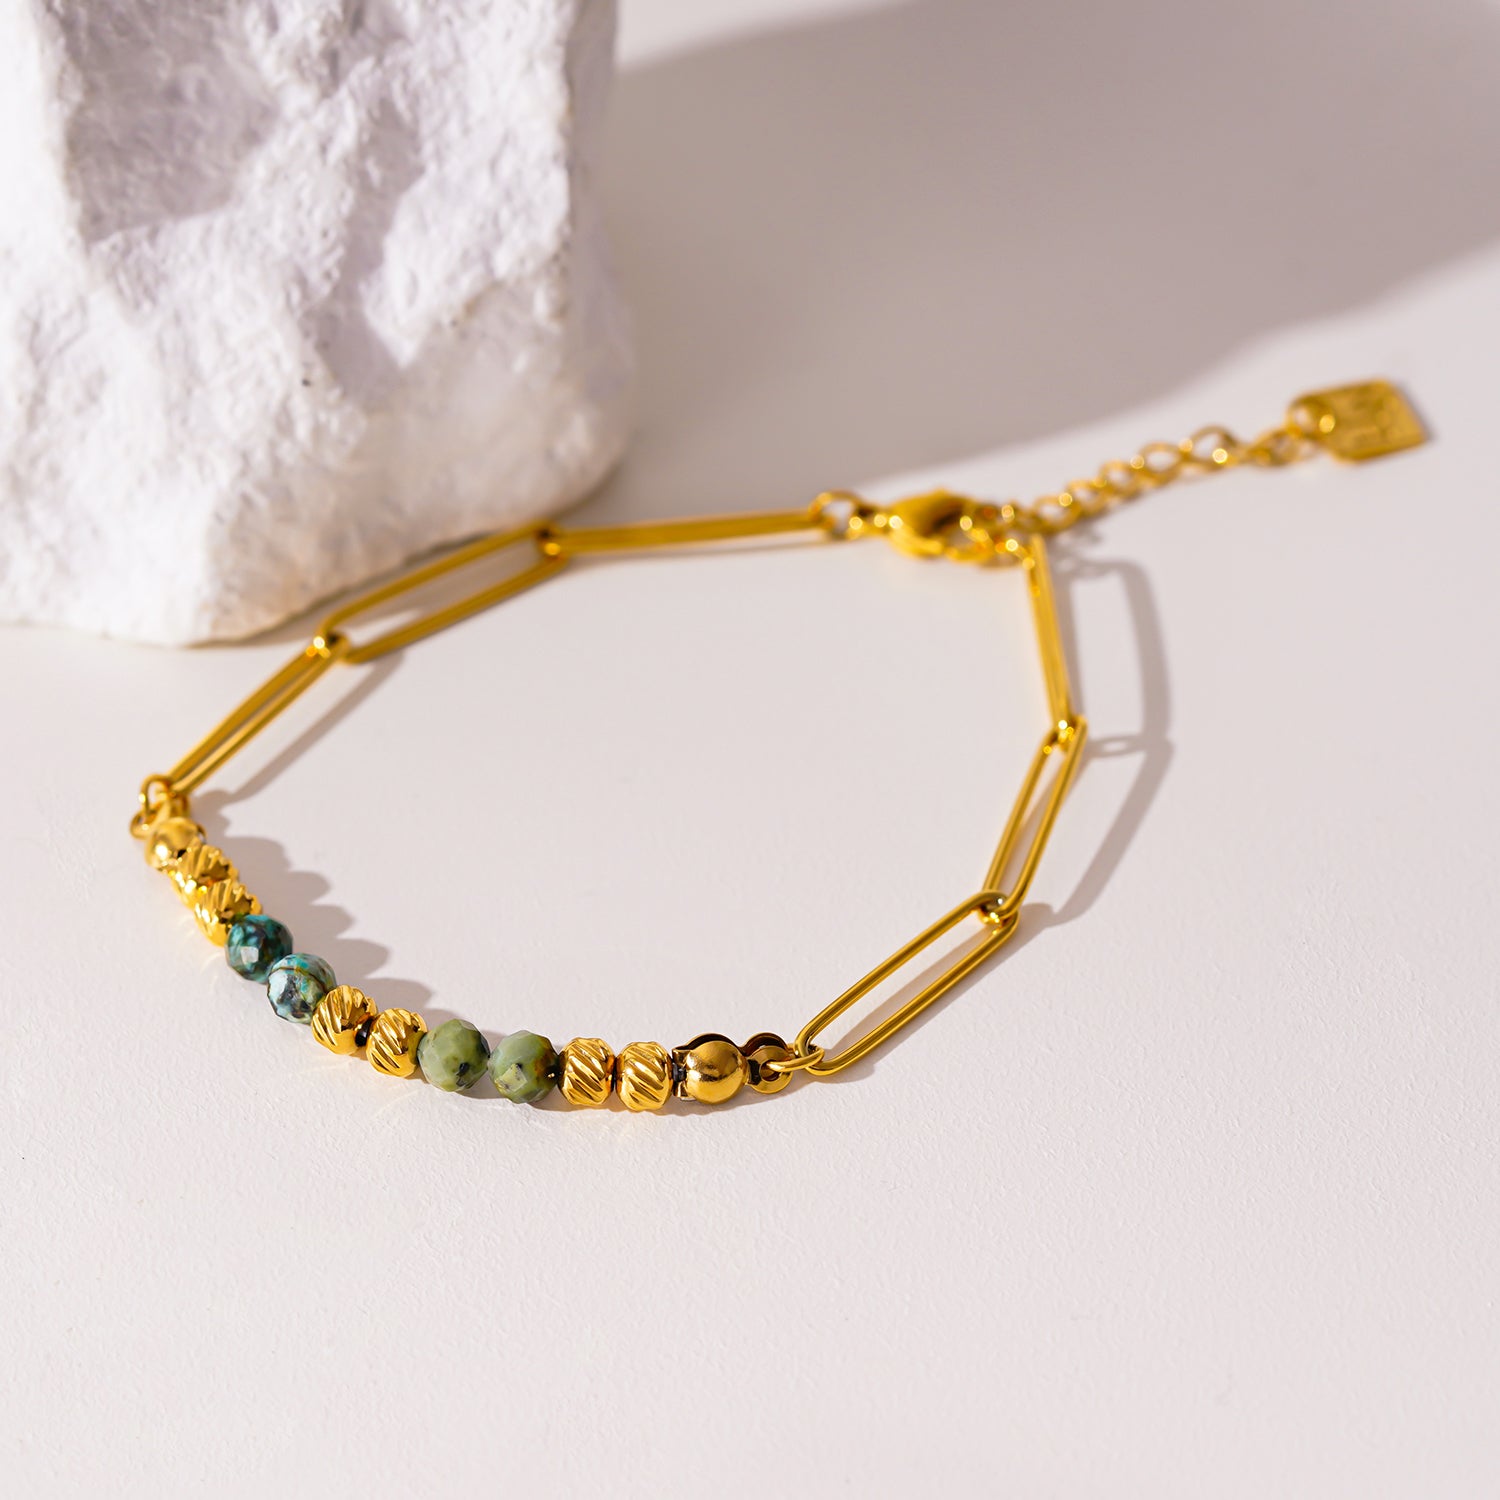 Style AIJAMI 6810: Link-Chain , Gold Beads & African Turquoise Natural Stones Bracelet.